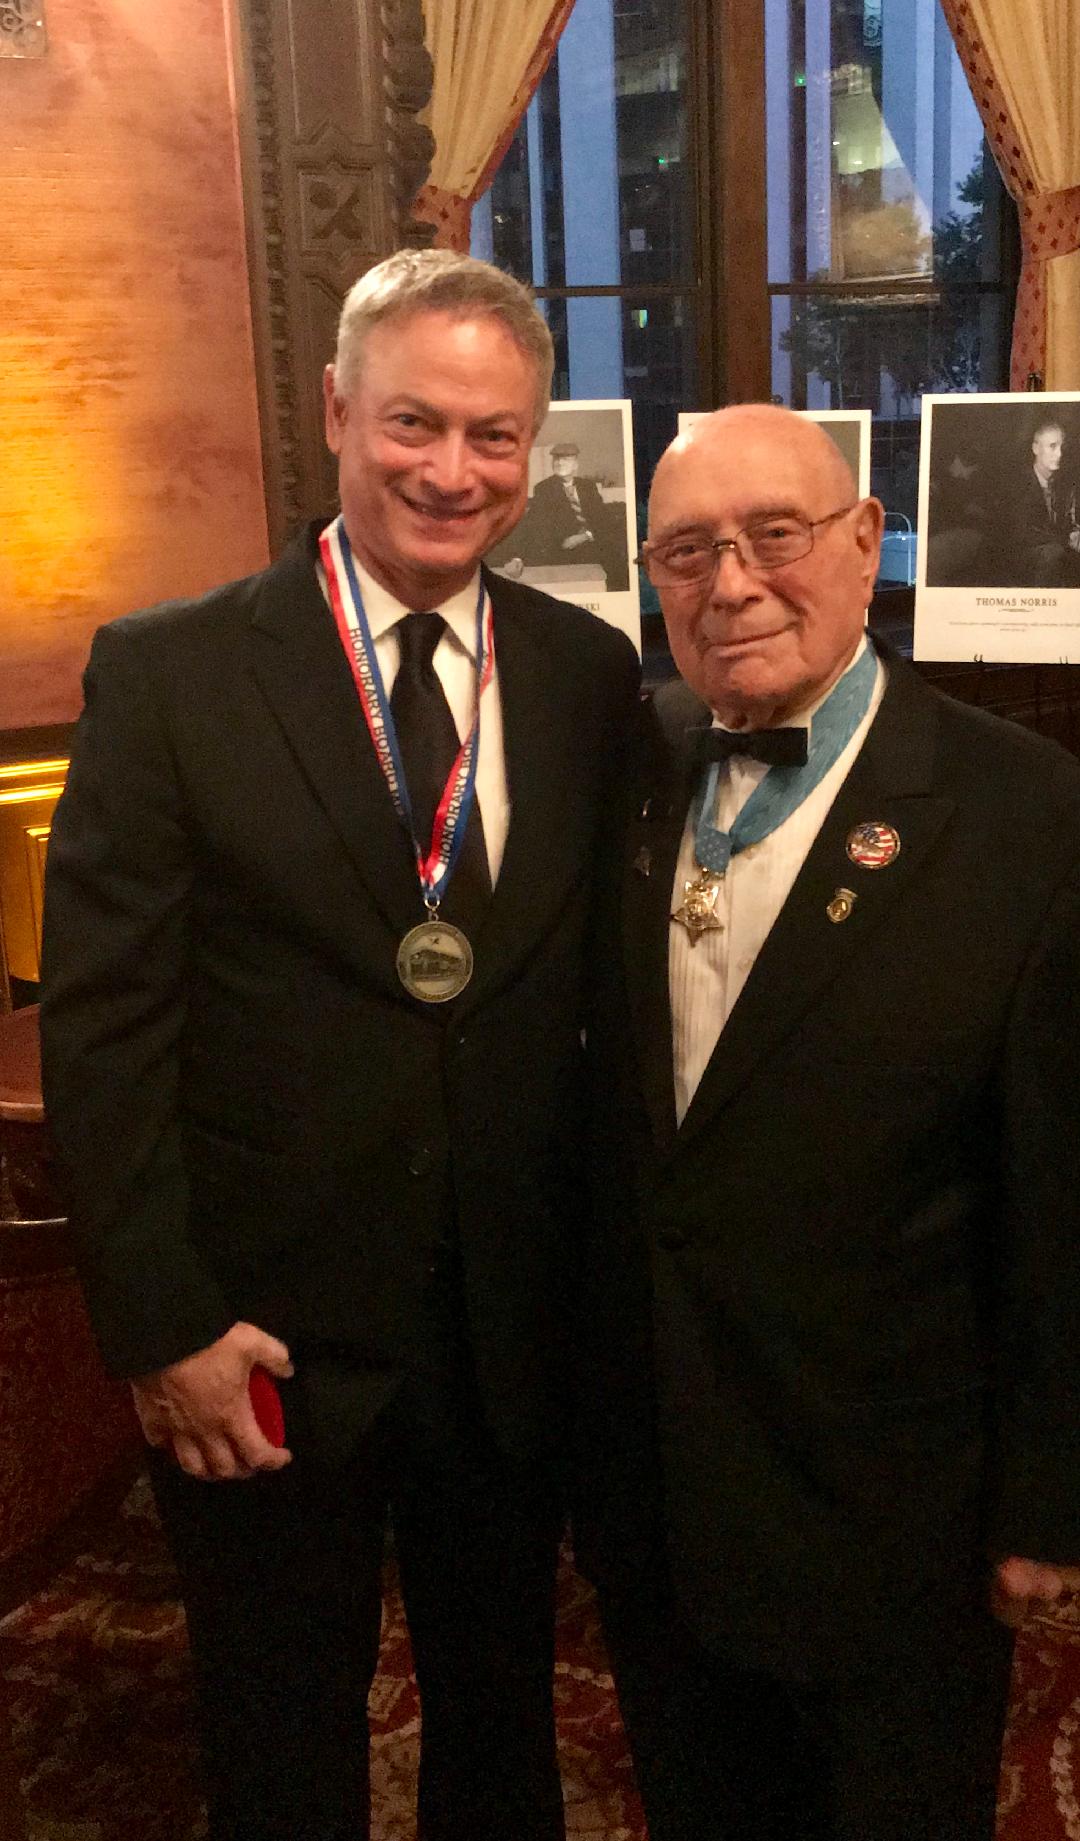 Woody Williams presents Gary Sinise with Honorary Board Member Medallion